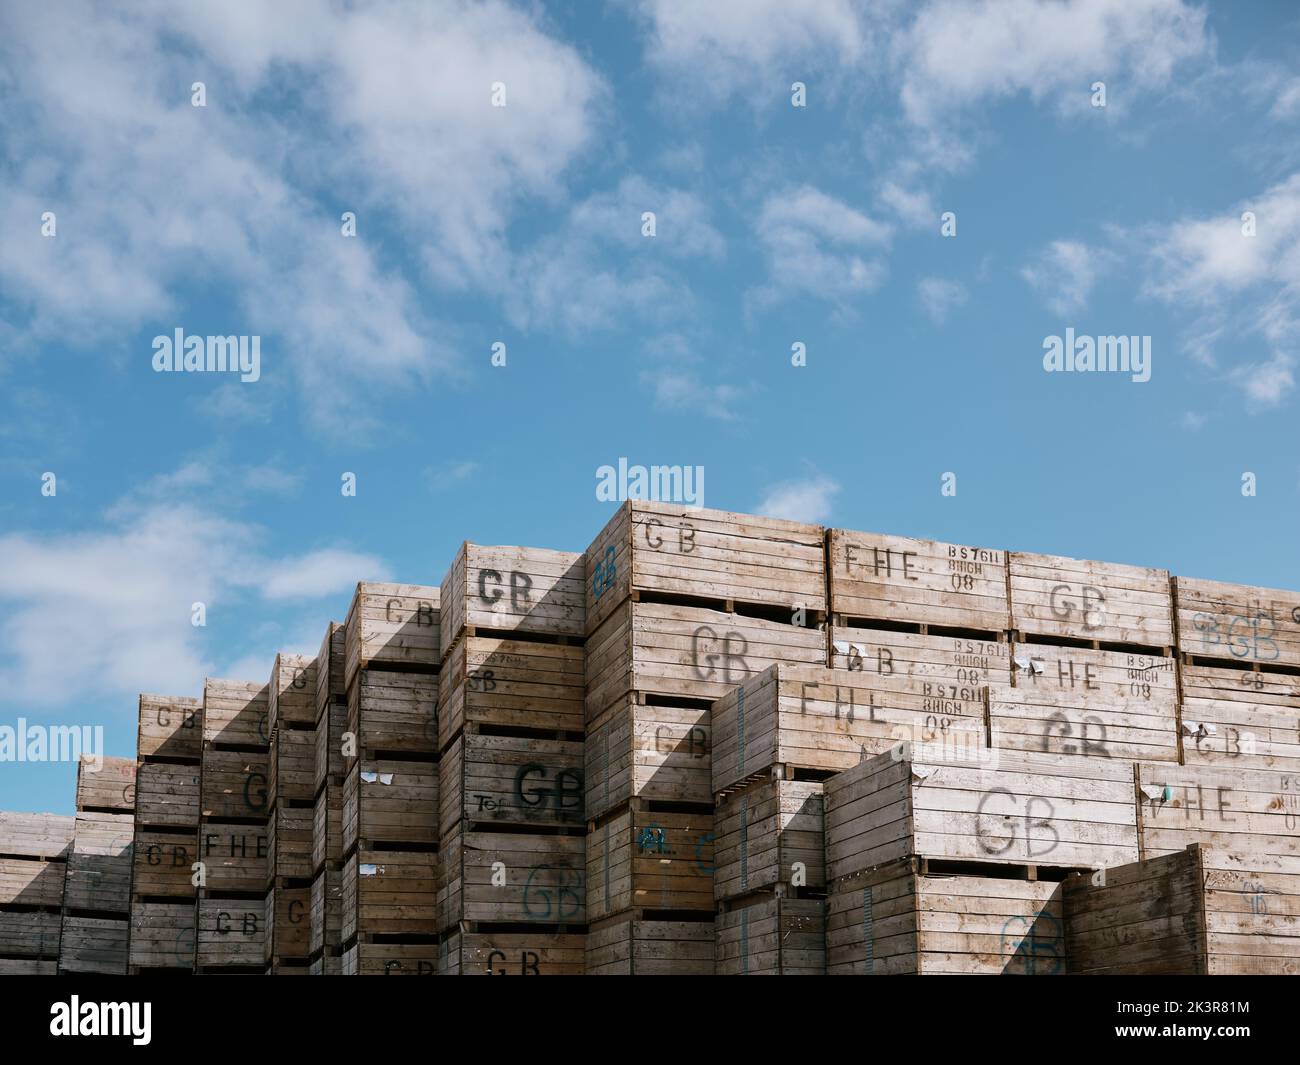 Wooden farm crates with GB identity markings stacked against a blue sky. Stock Photo